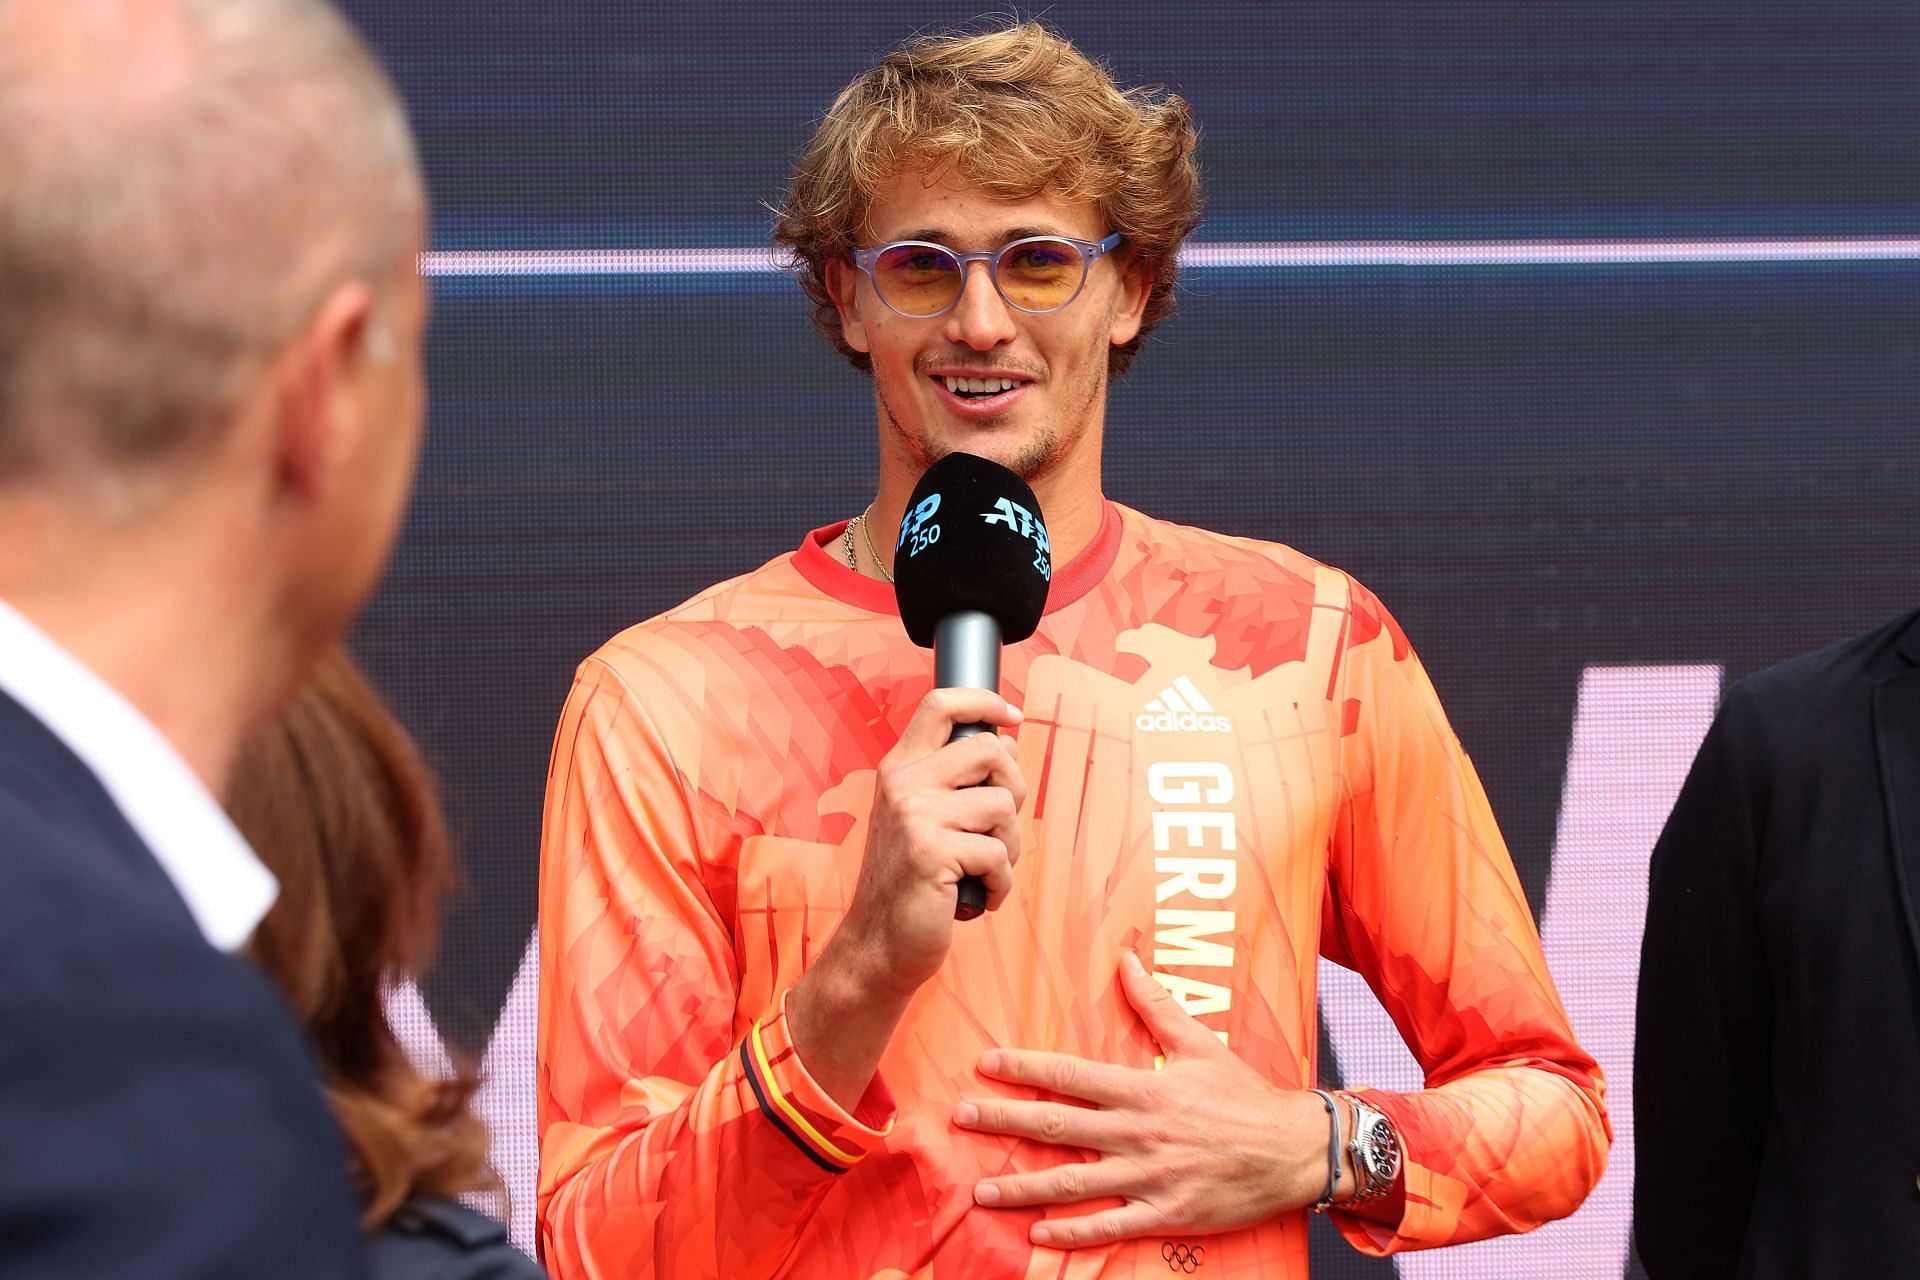 Alexander Zverev at the BMW Open Press Conference